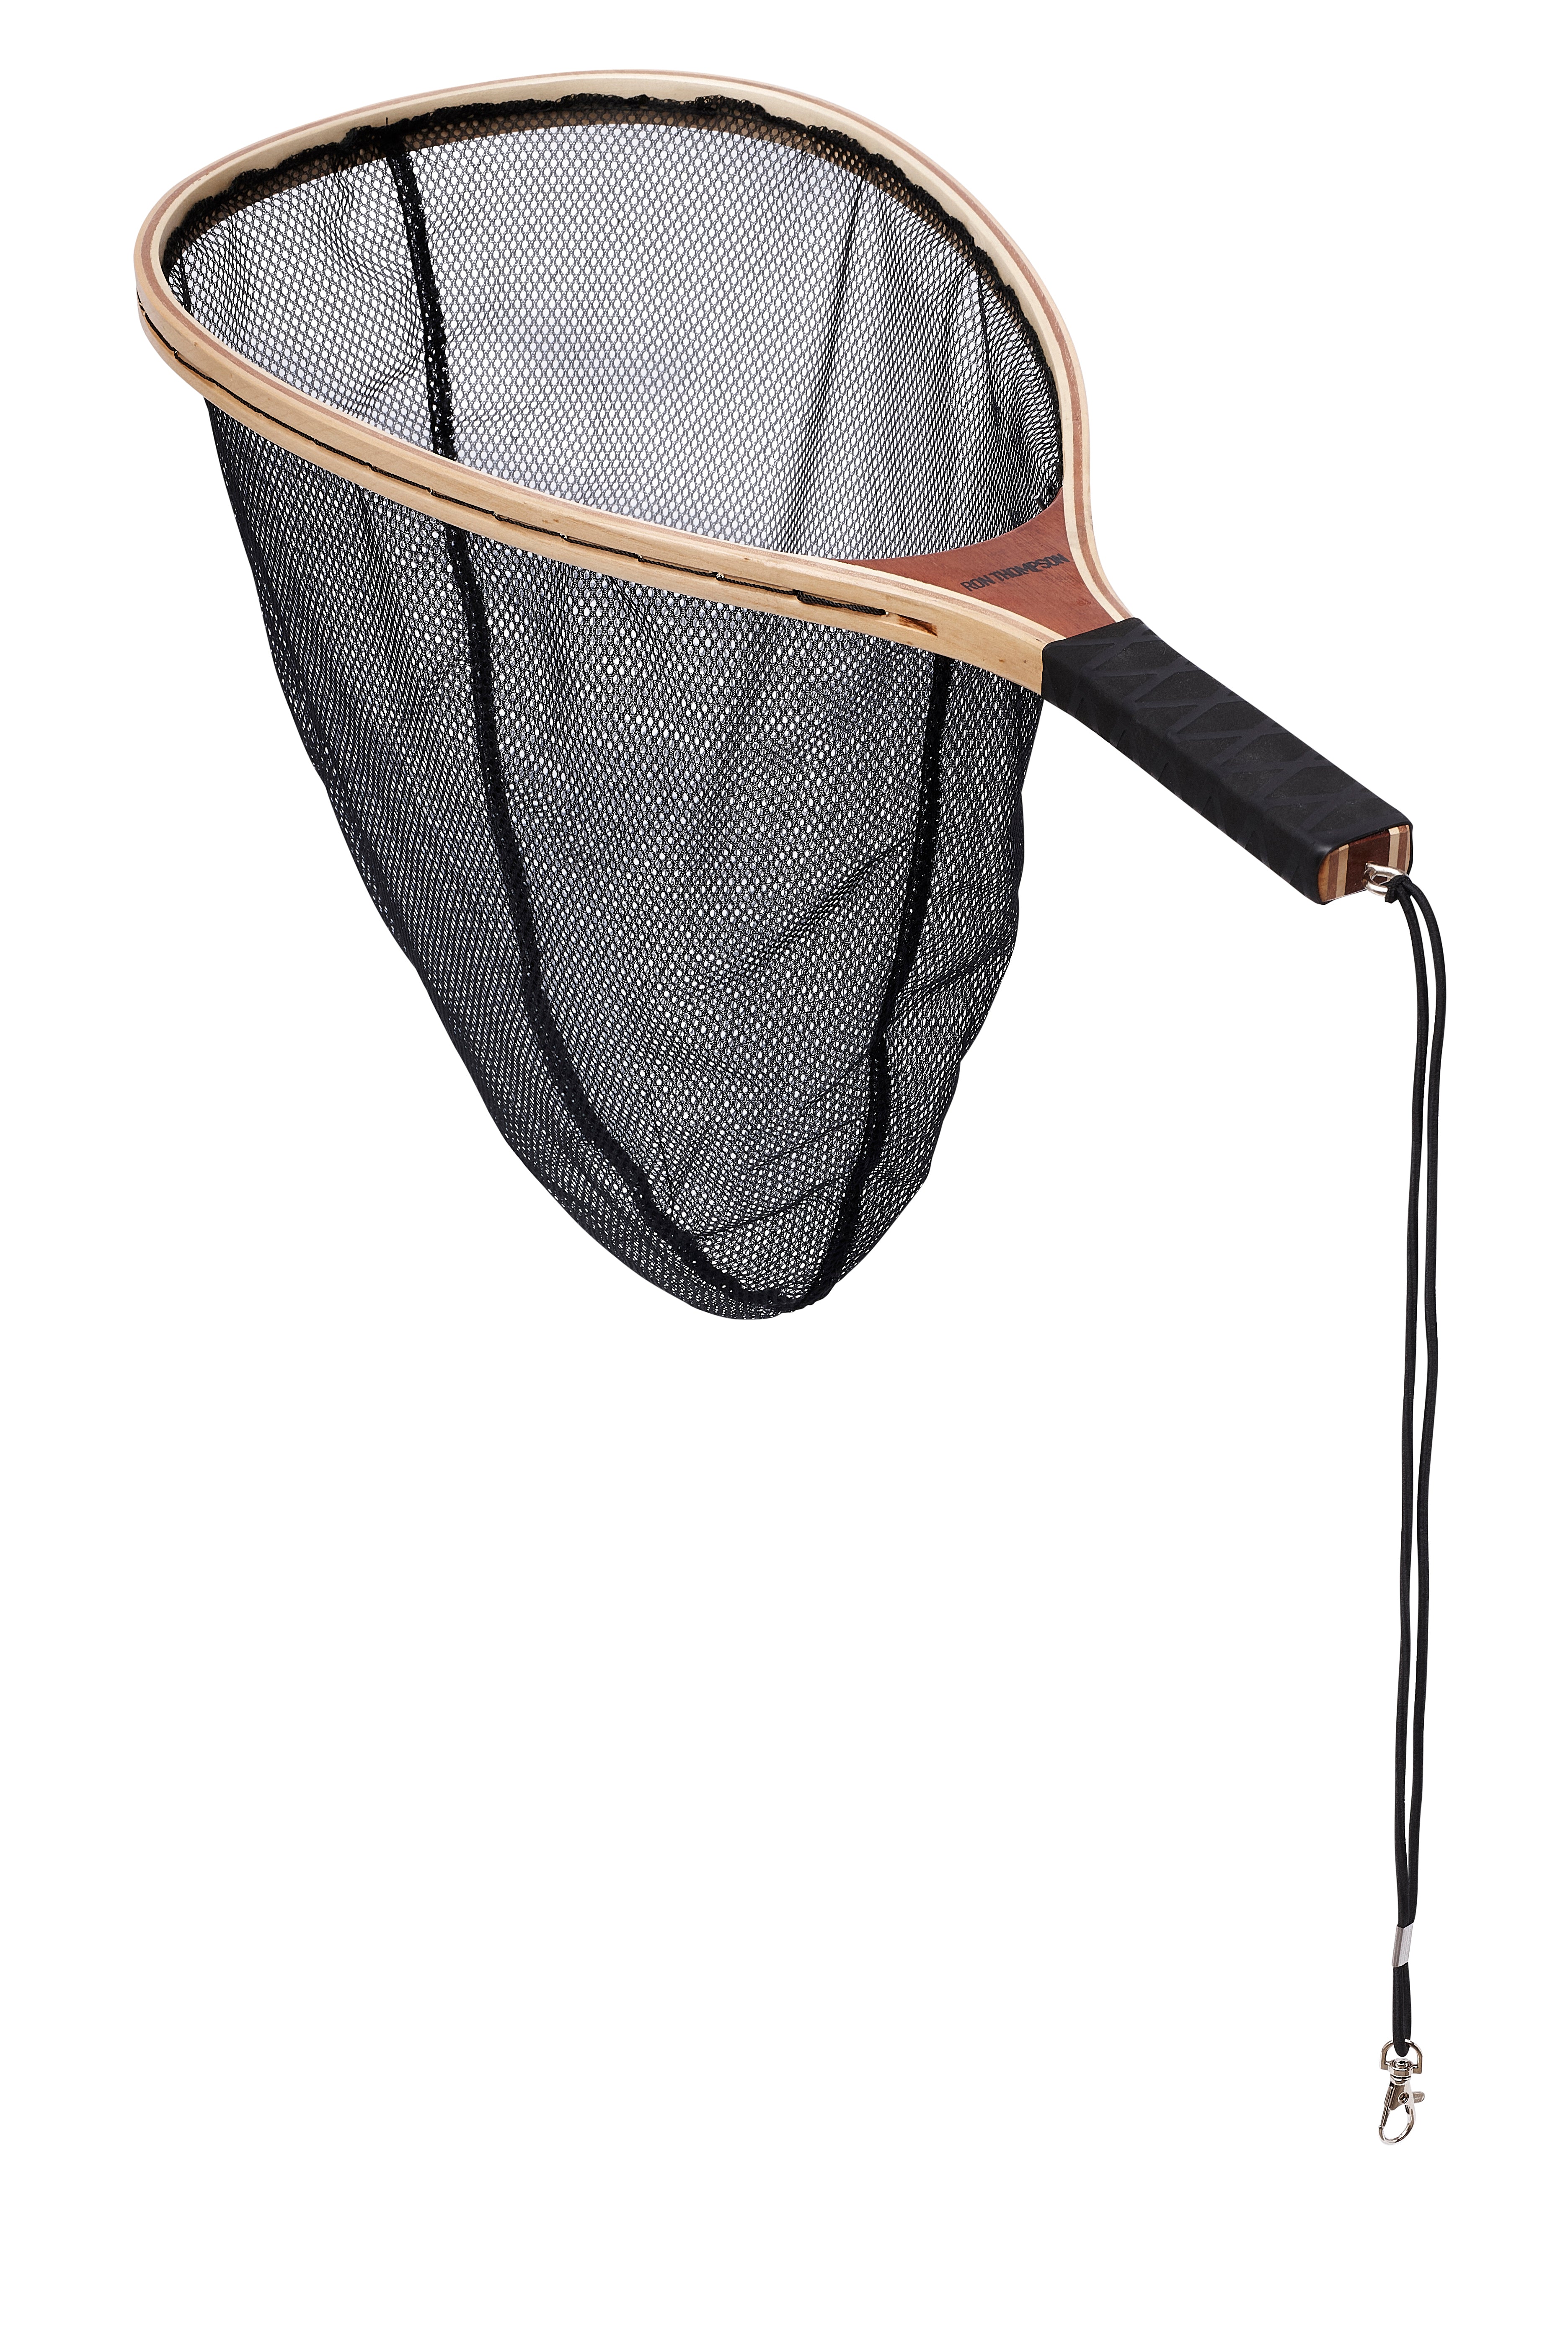 DAM Manitoba Wooden Catch and Release Landing Net